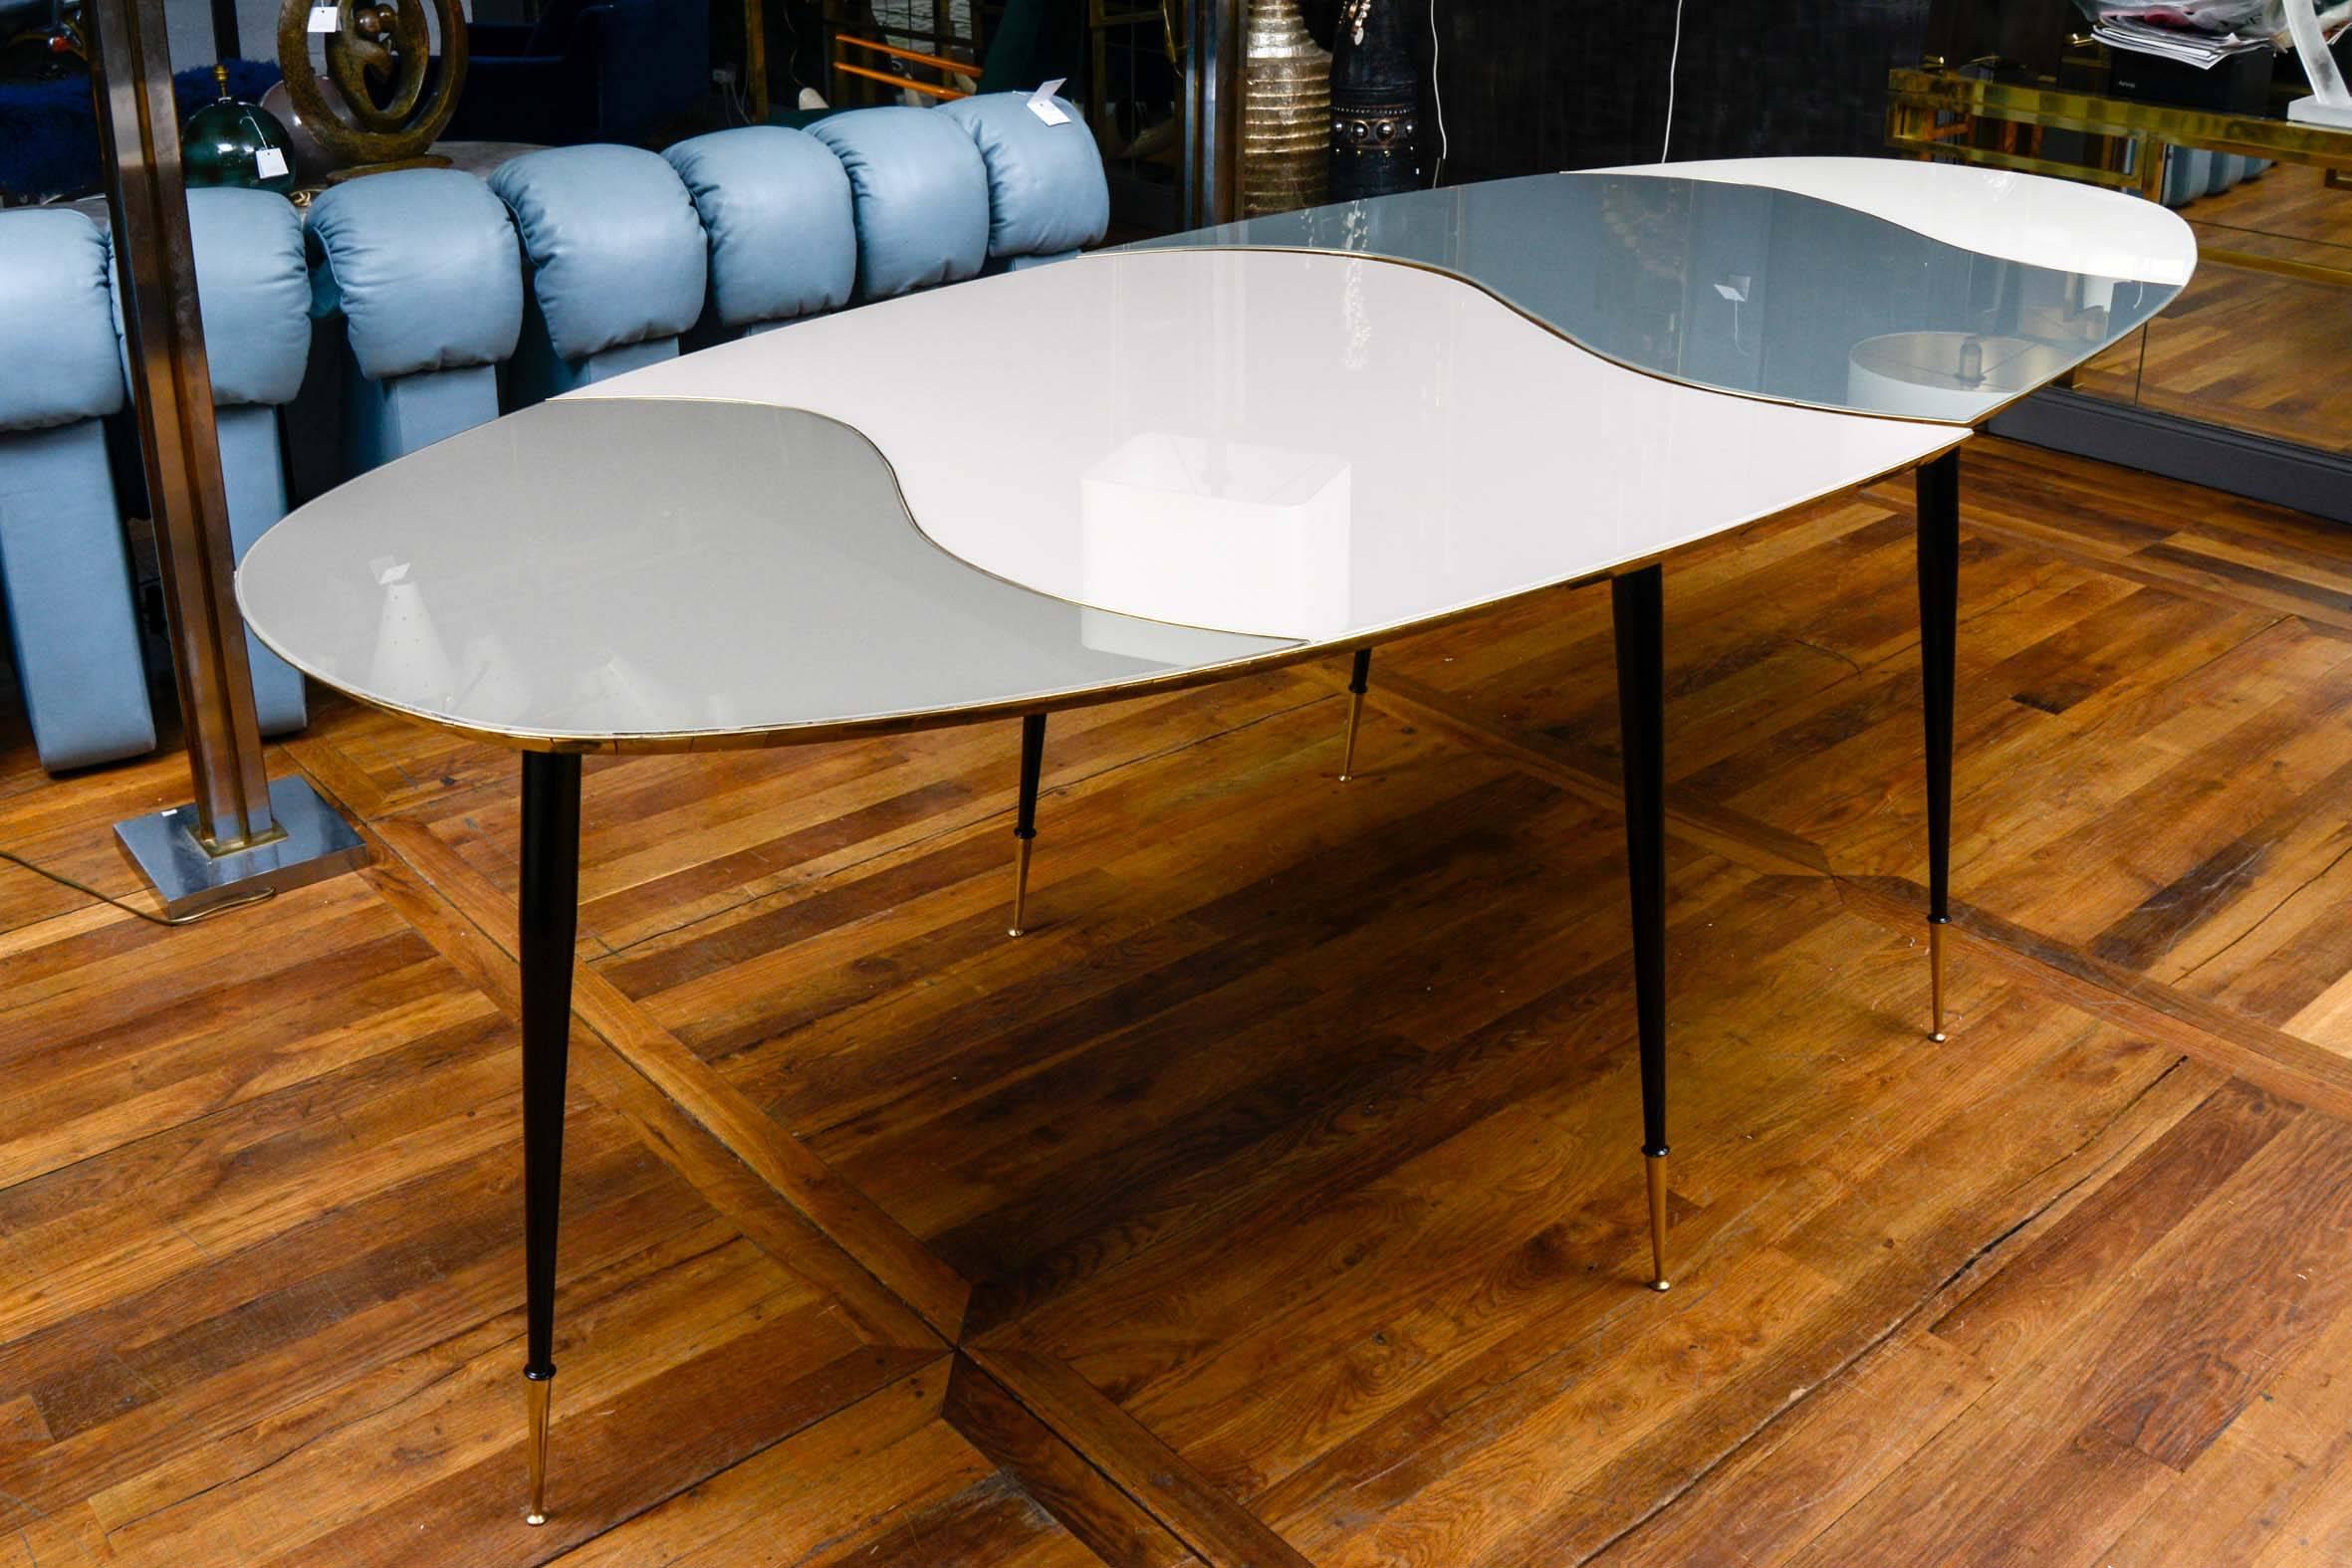 Top mirror table divided in two parts, brass fillet, six feet.
Possibility to choose different colors of mirror for this table.
Collection Studio Glustin.
 